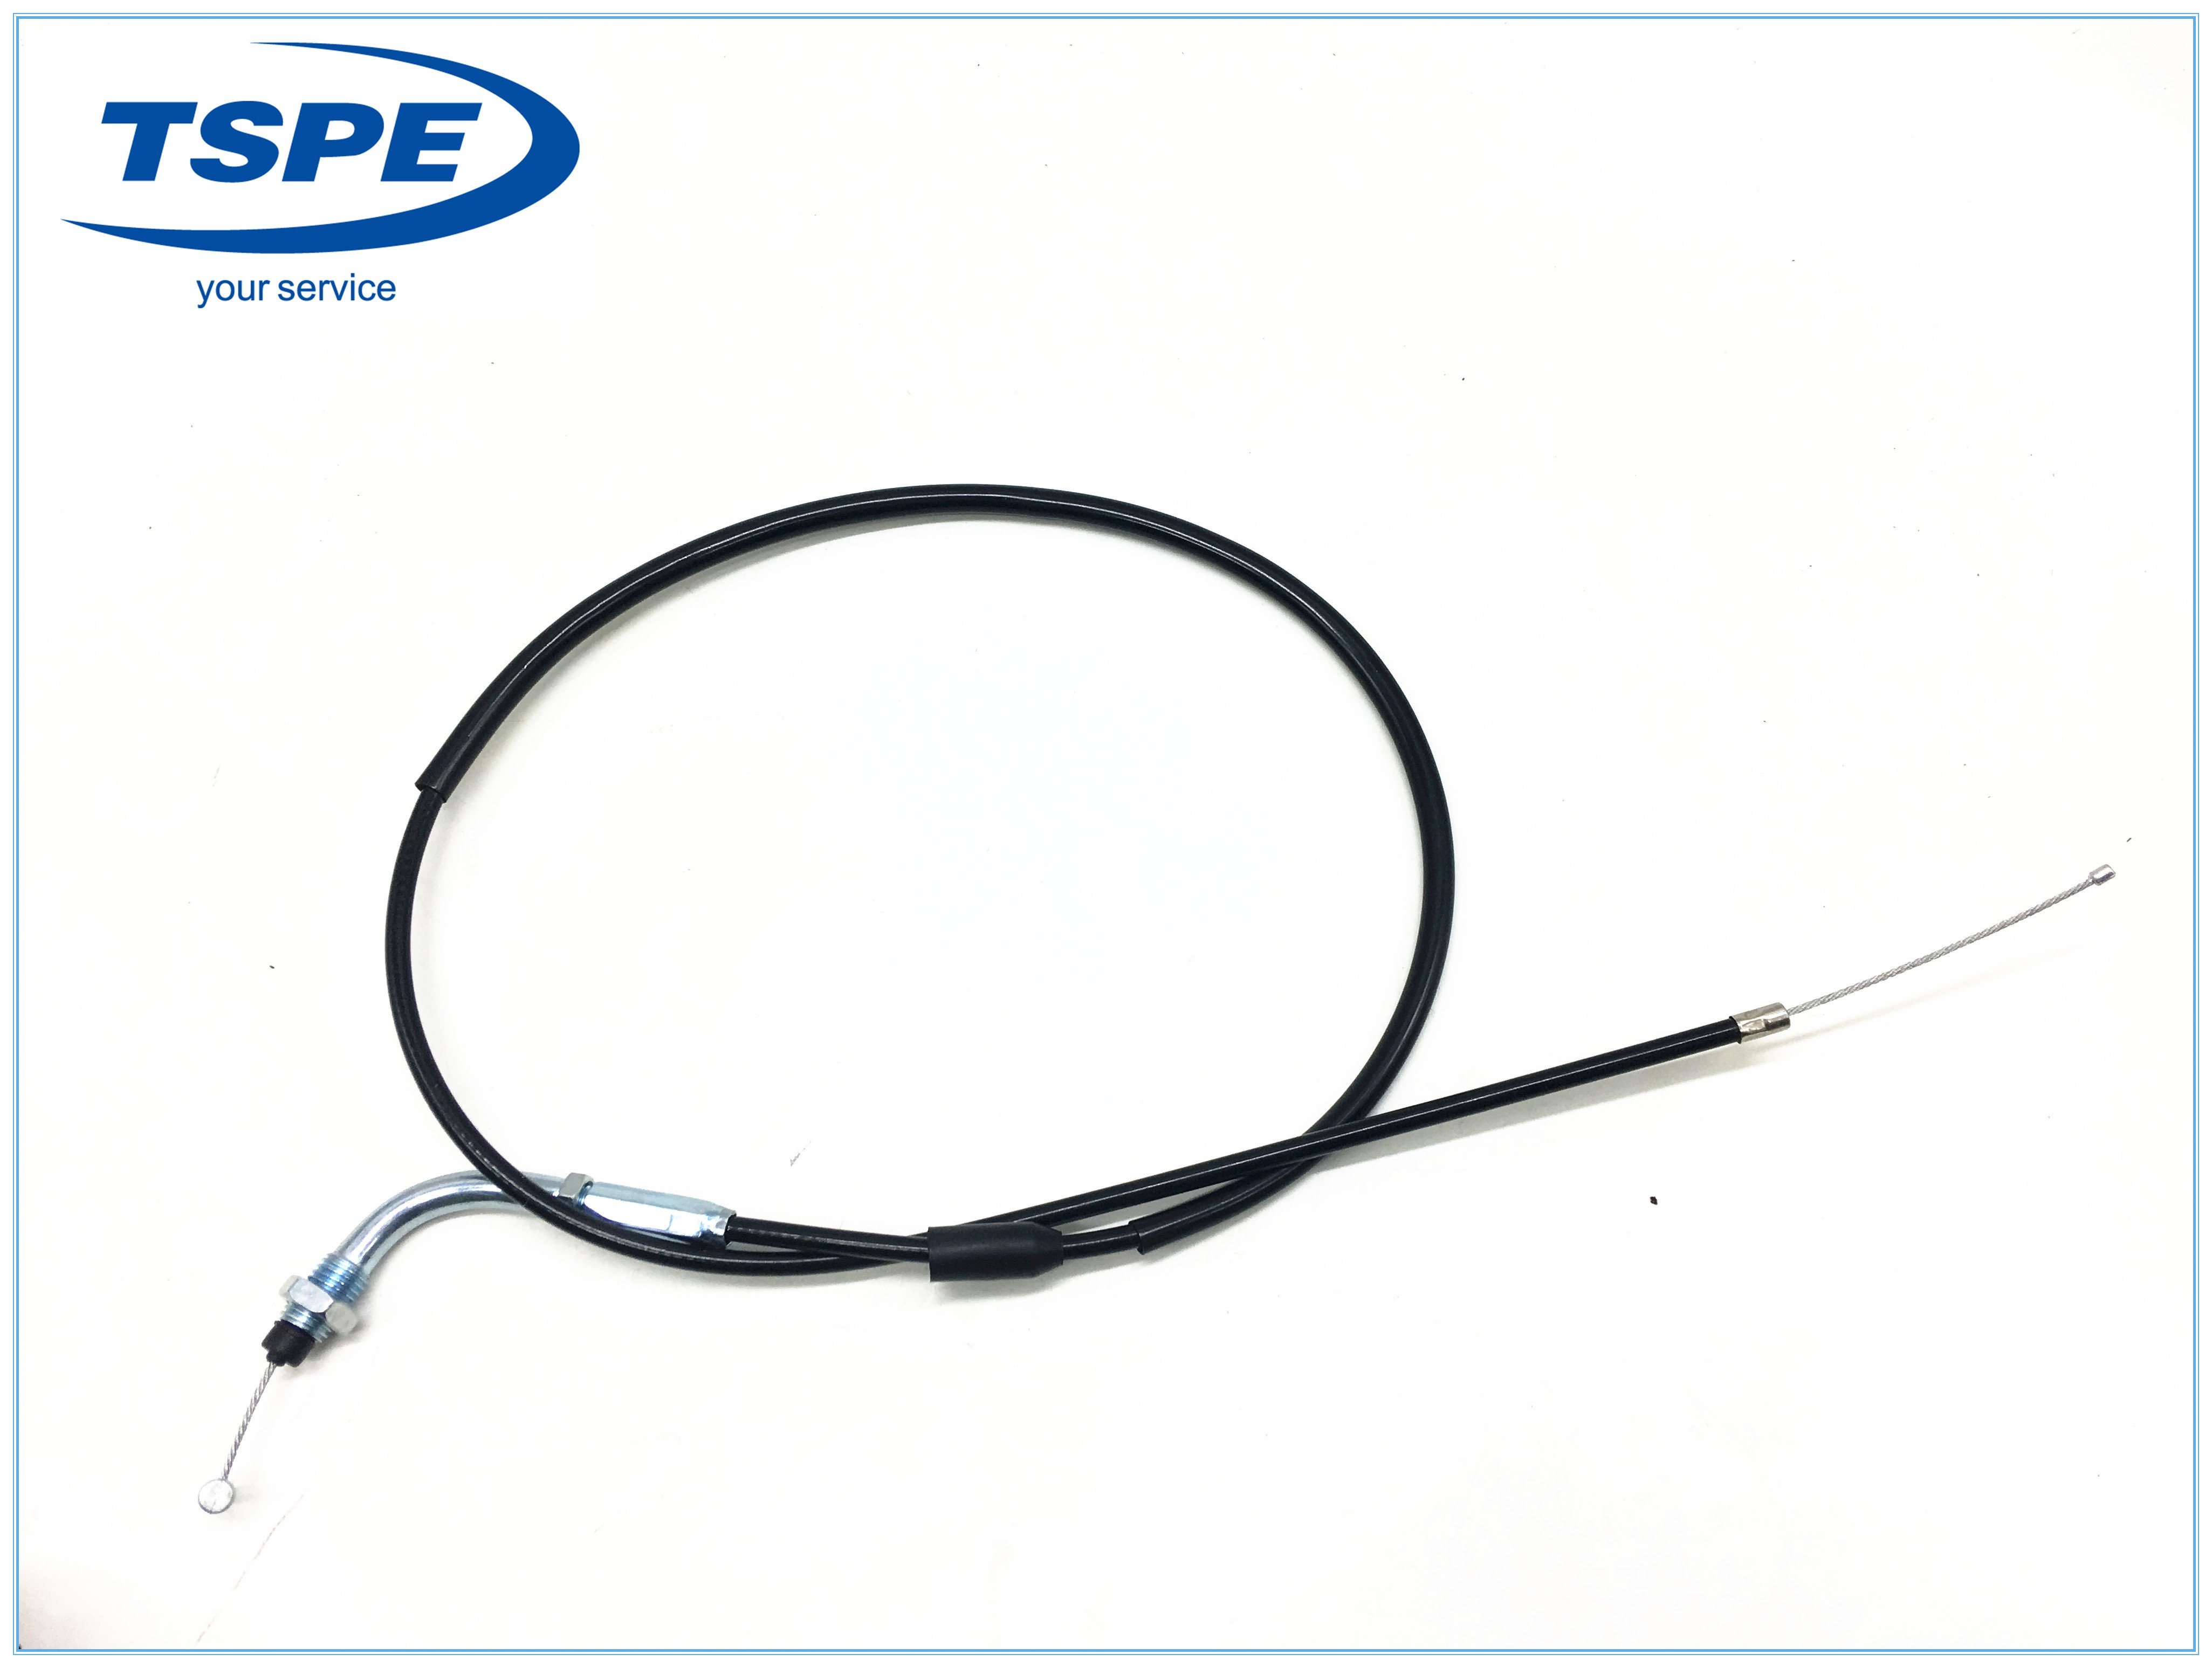 Motorcycle Parts Motorcycle Throttle Cable FT-150 Italika